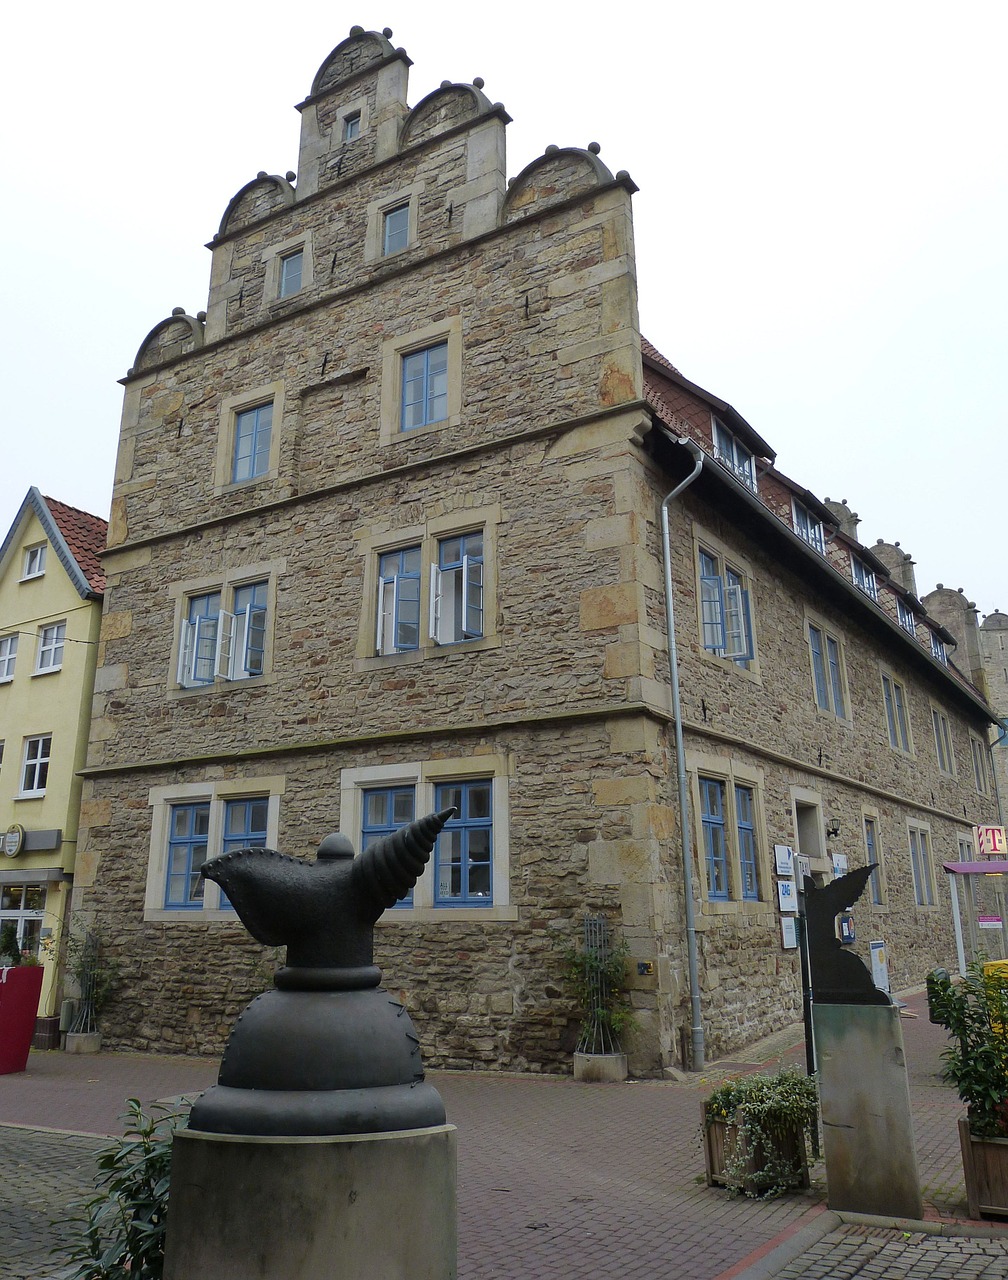 stadthagen lower saxony old town free photo